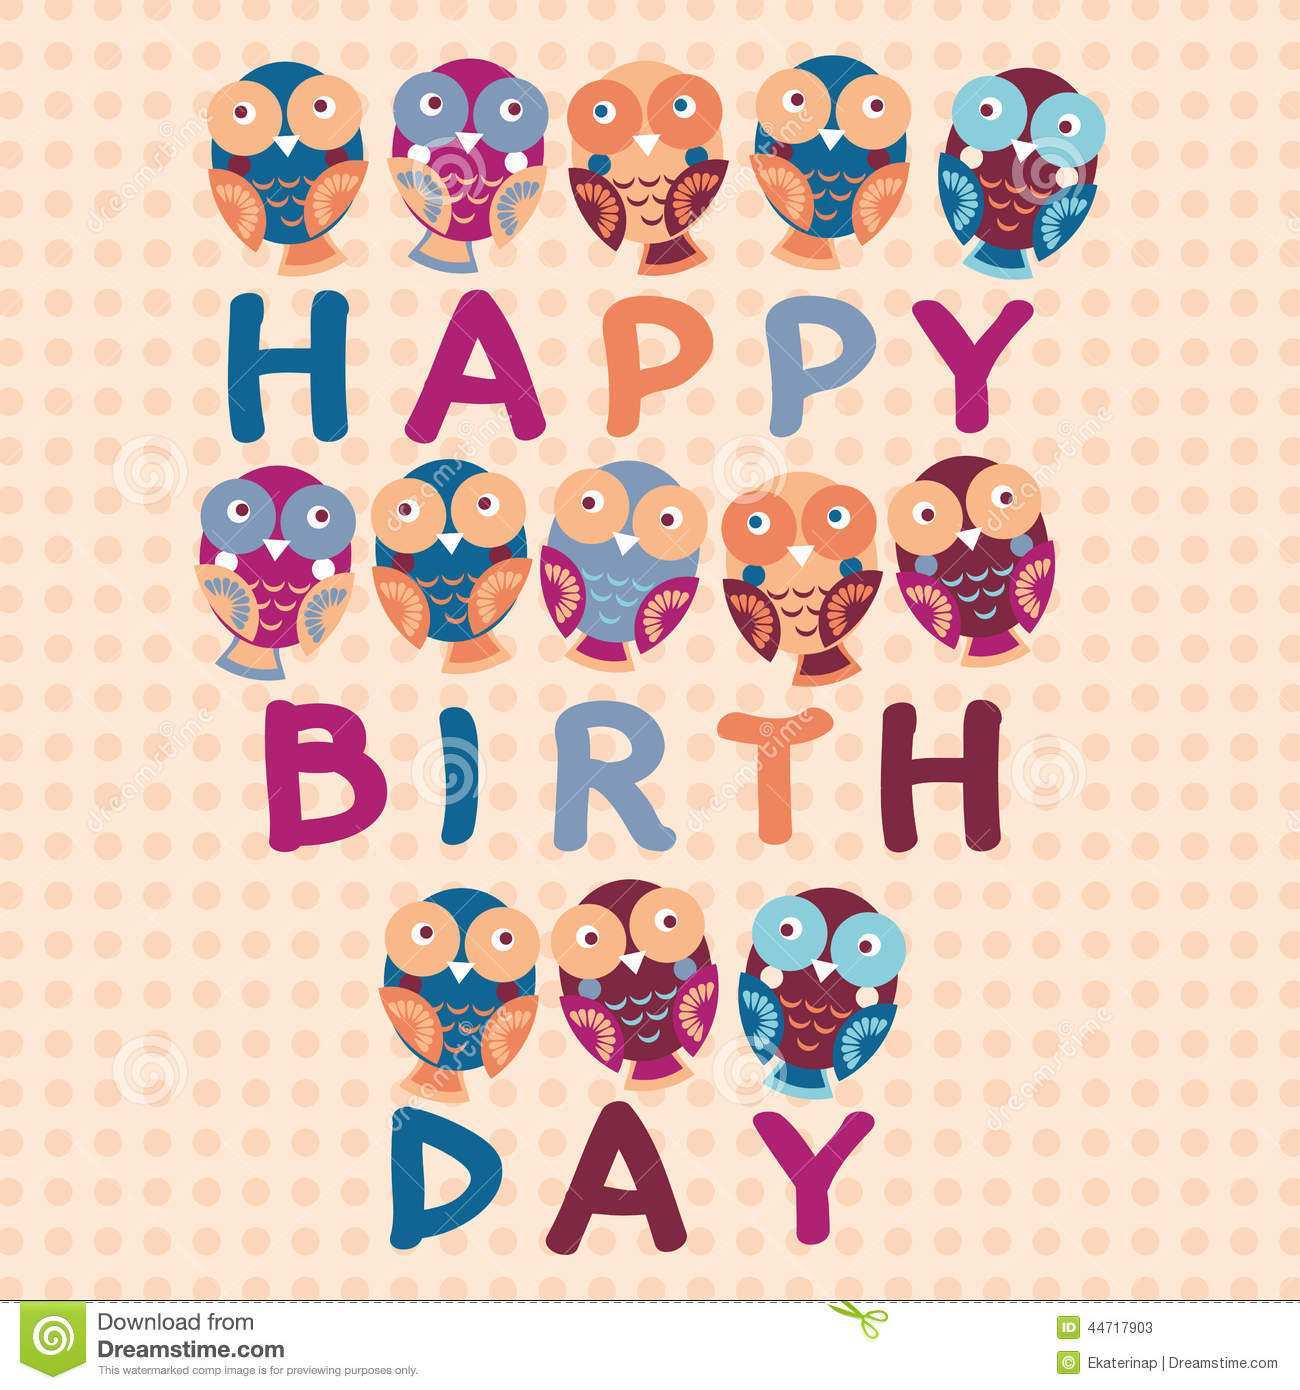 15 Customize Our Free Owl Birthday Card Template Photo for Owl Birthday Card Template